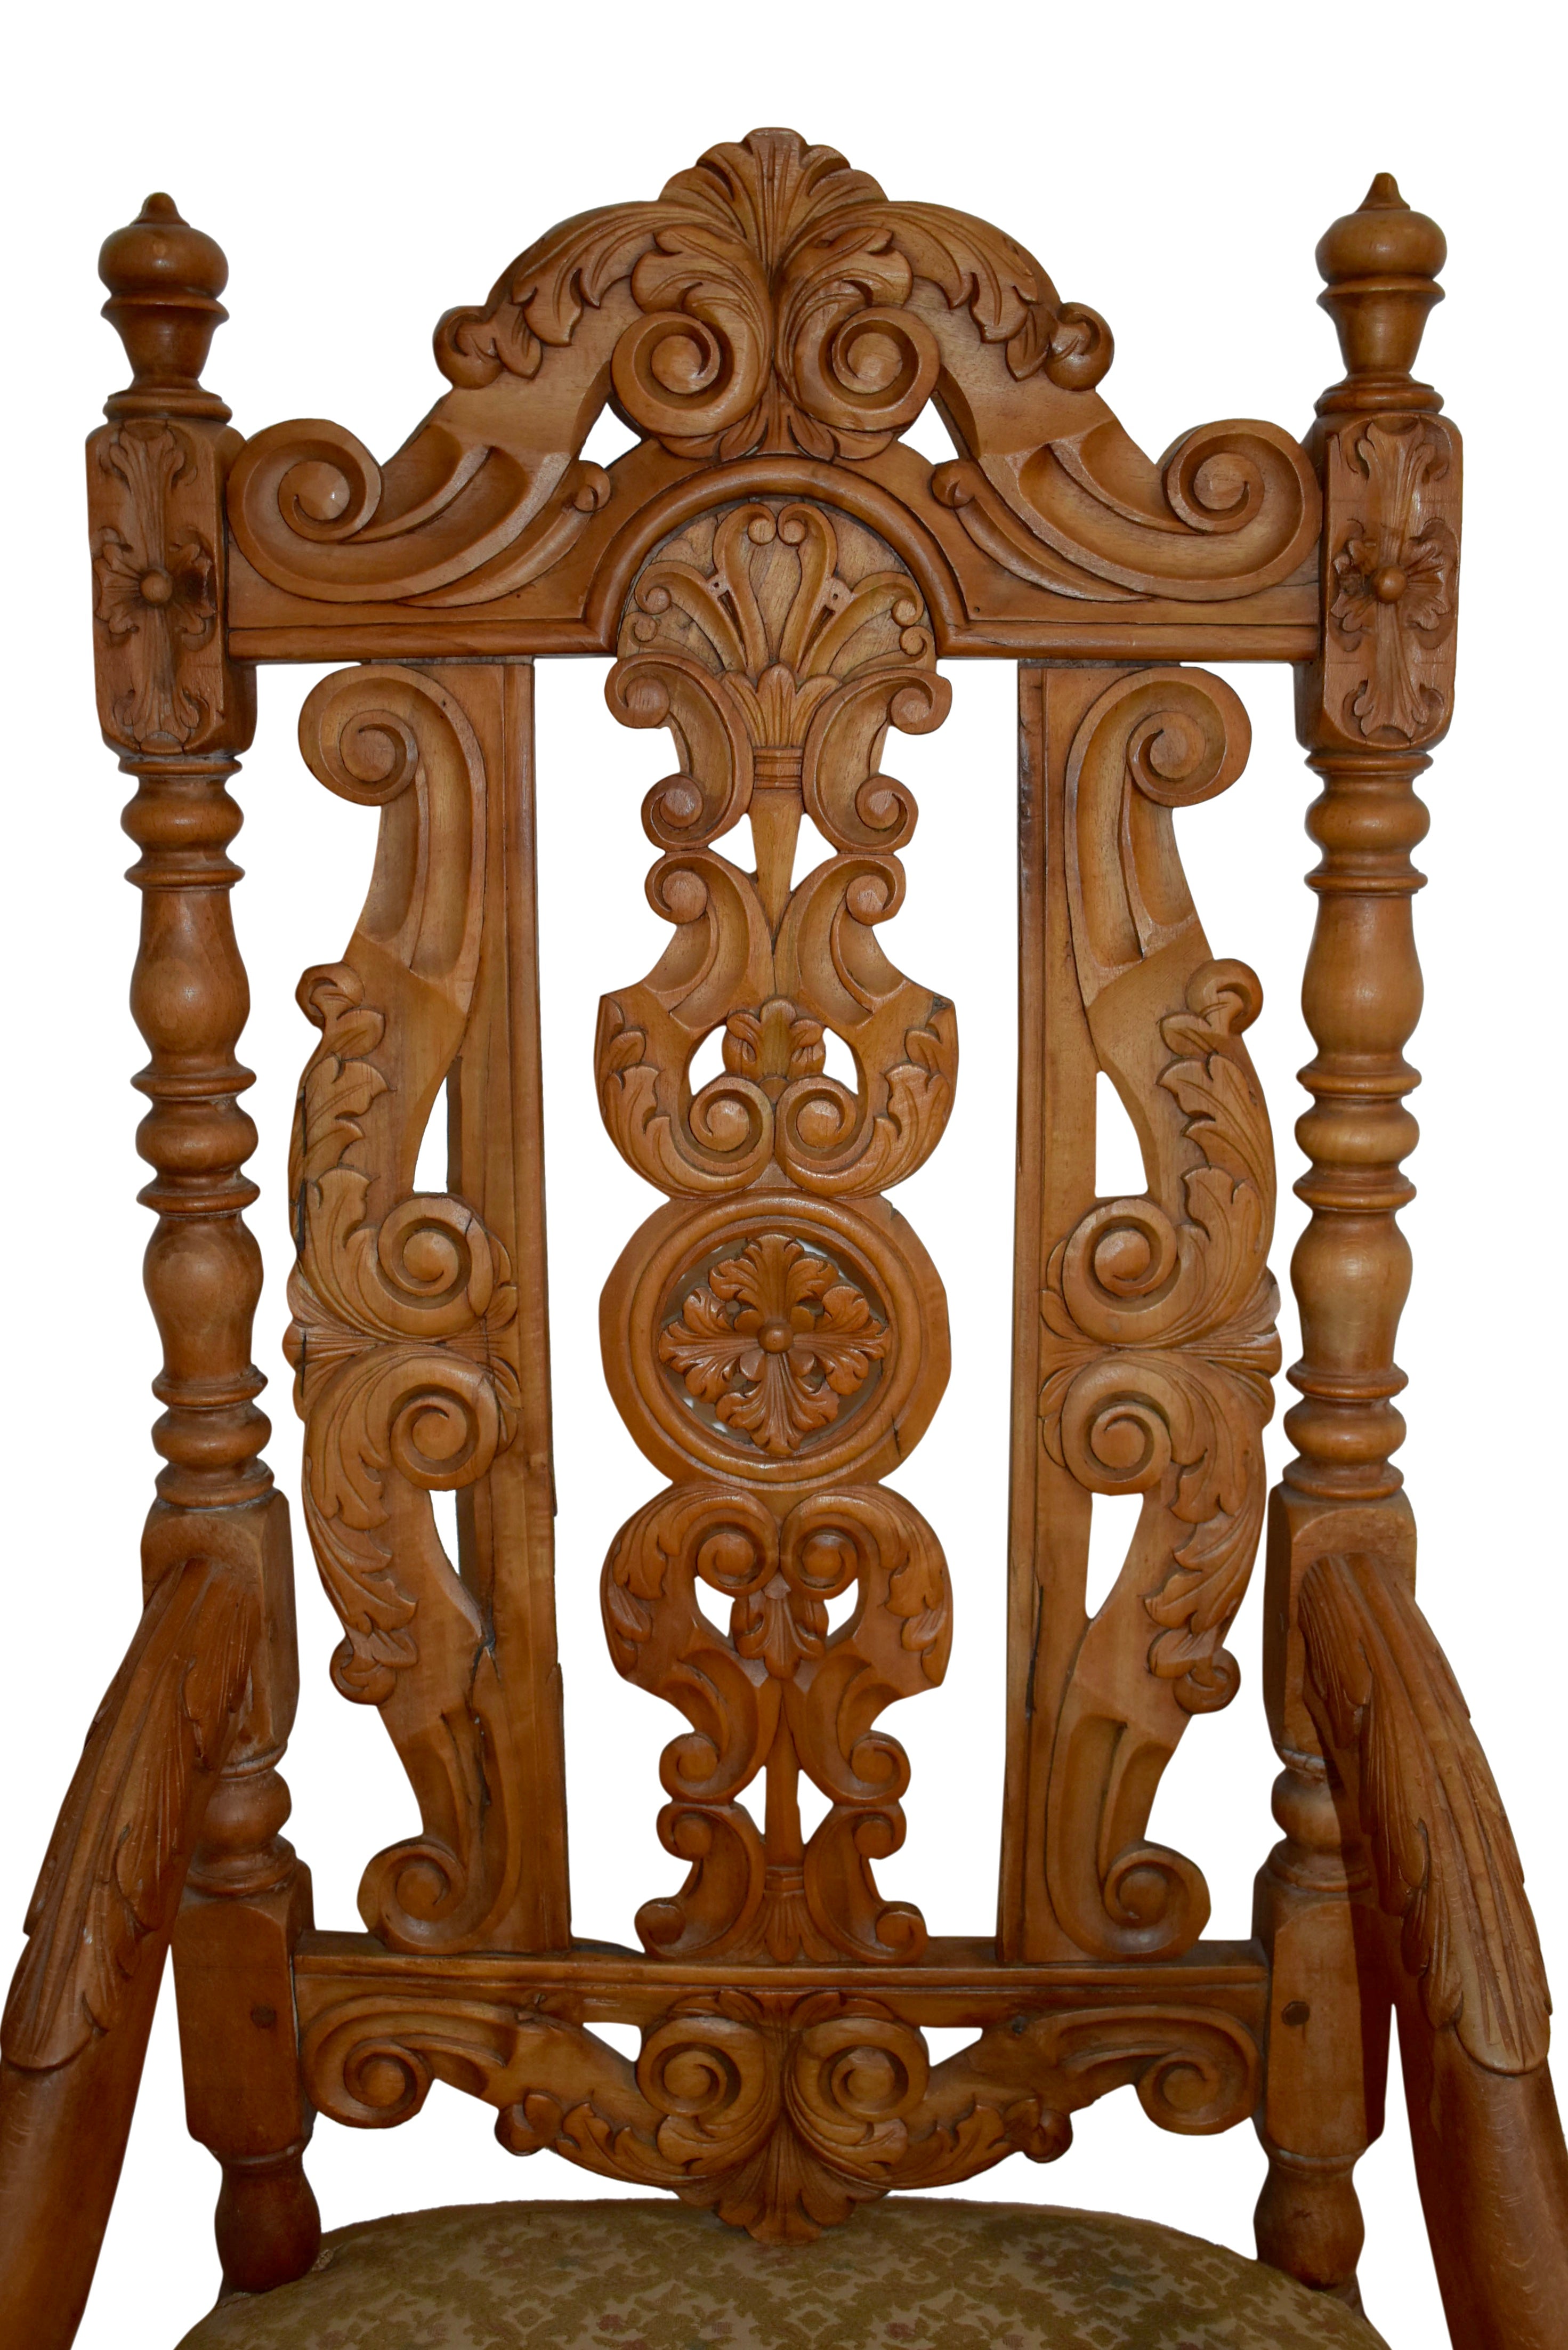 Carved Hunt Armchair